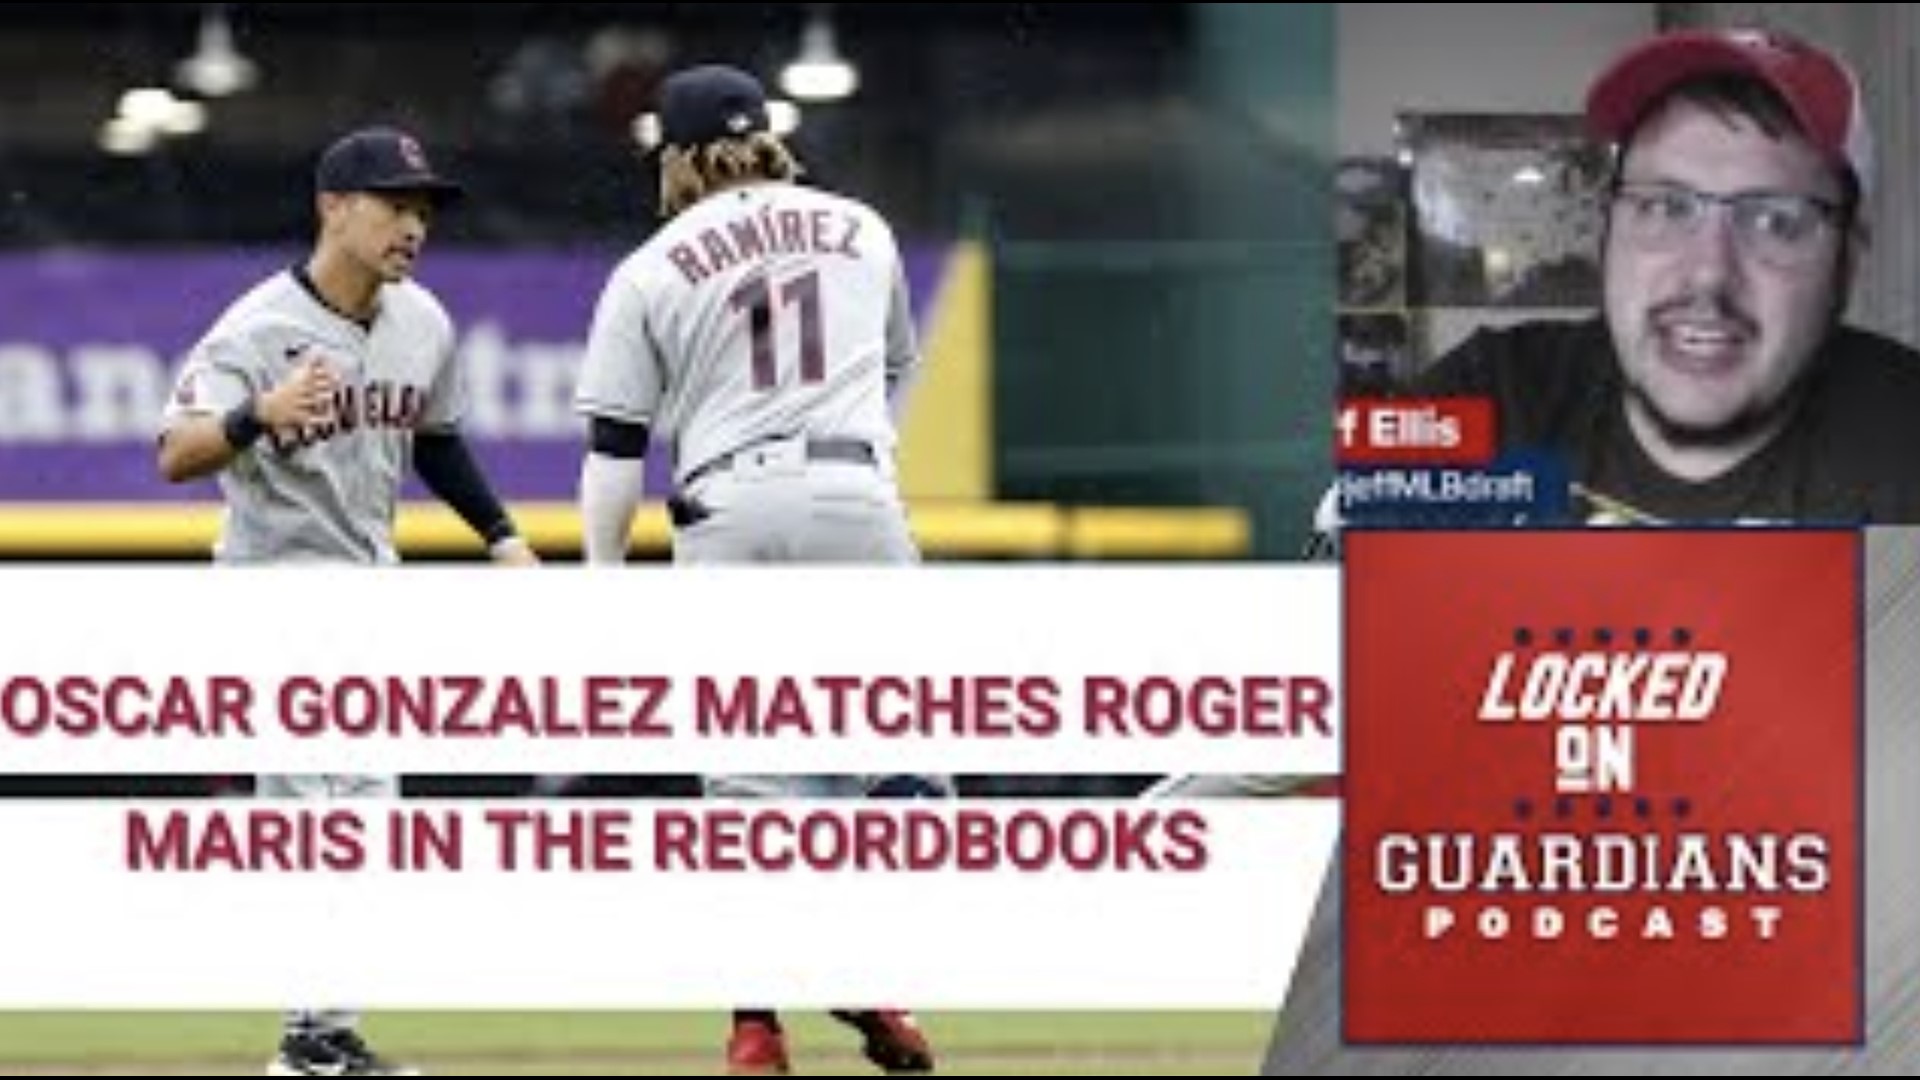 A discussion about the continued excellence of Oscar Gonzalez leads to talk about Roger Maris, who came up with Cleveland.